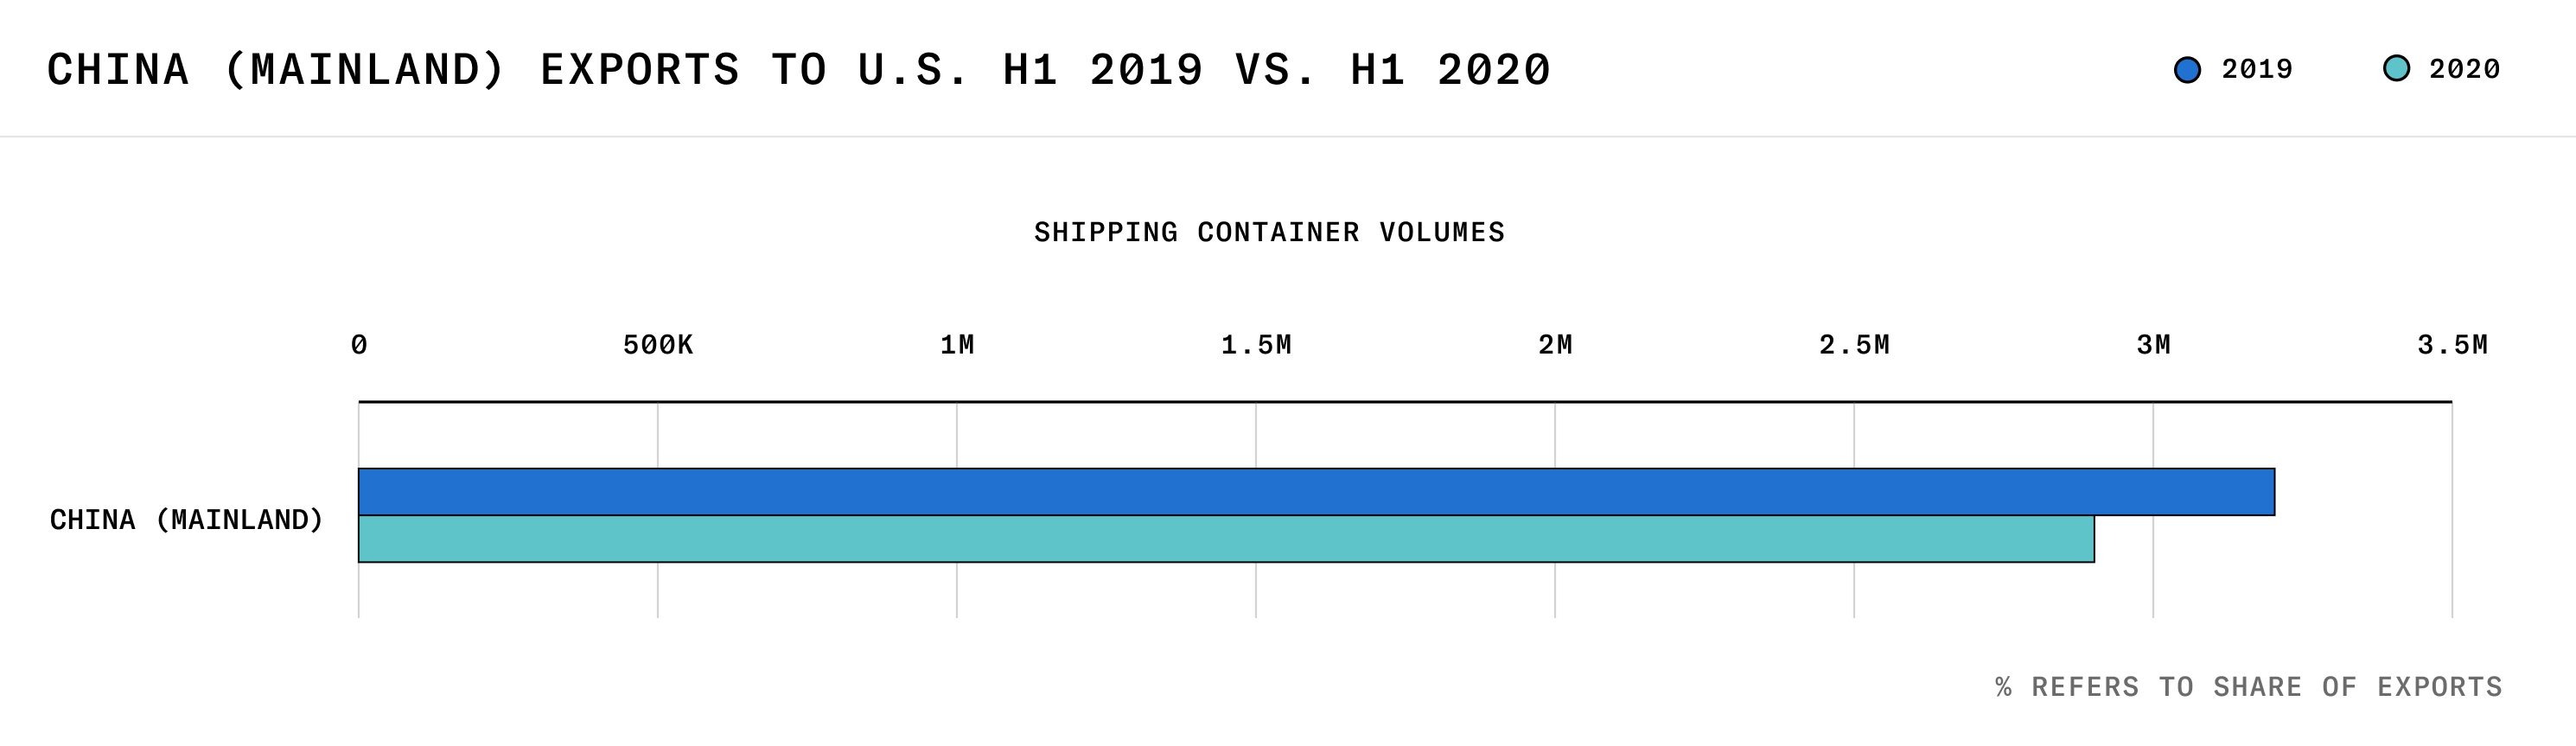 Chart depicting Chinese exports to the US in container volumes